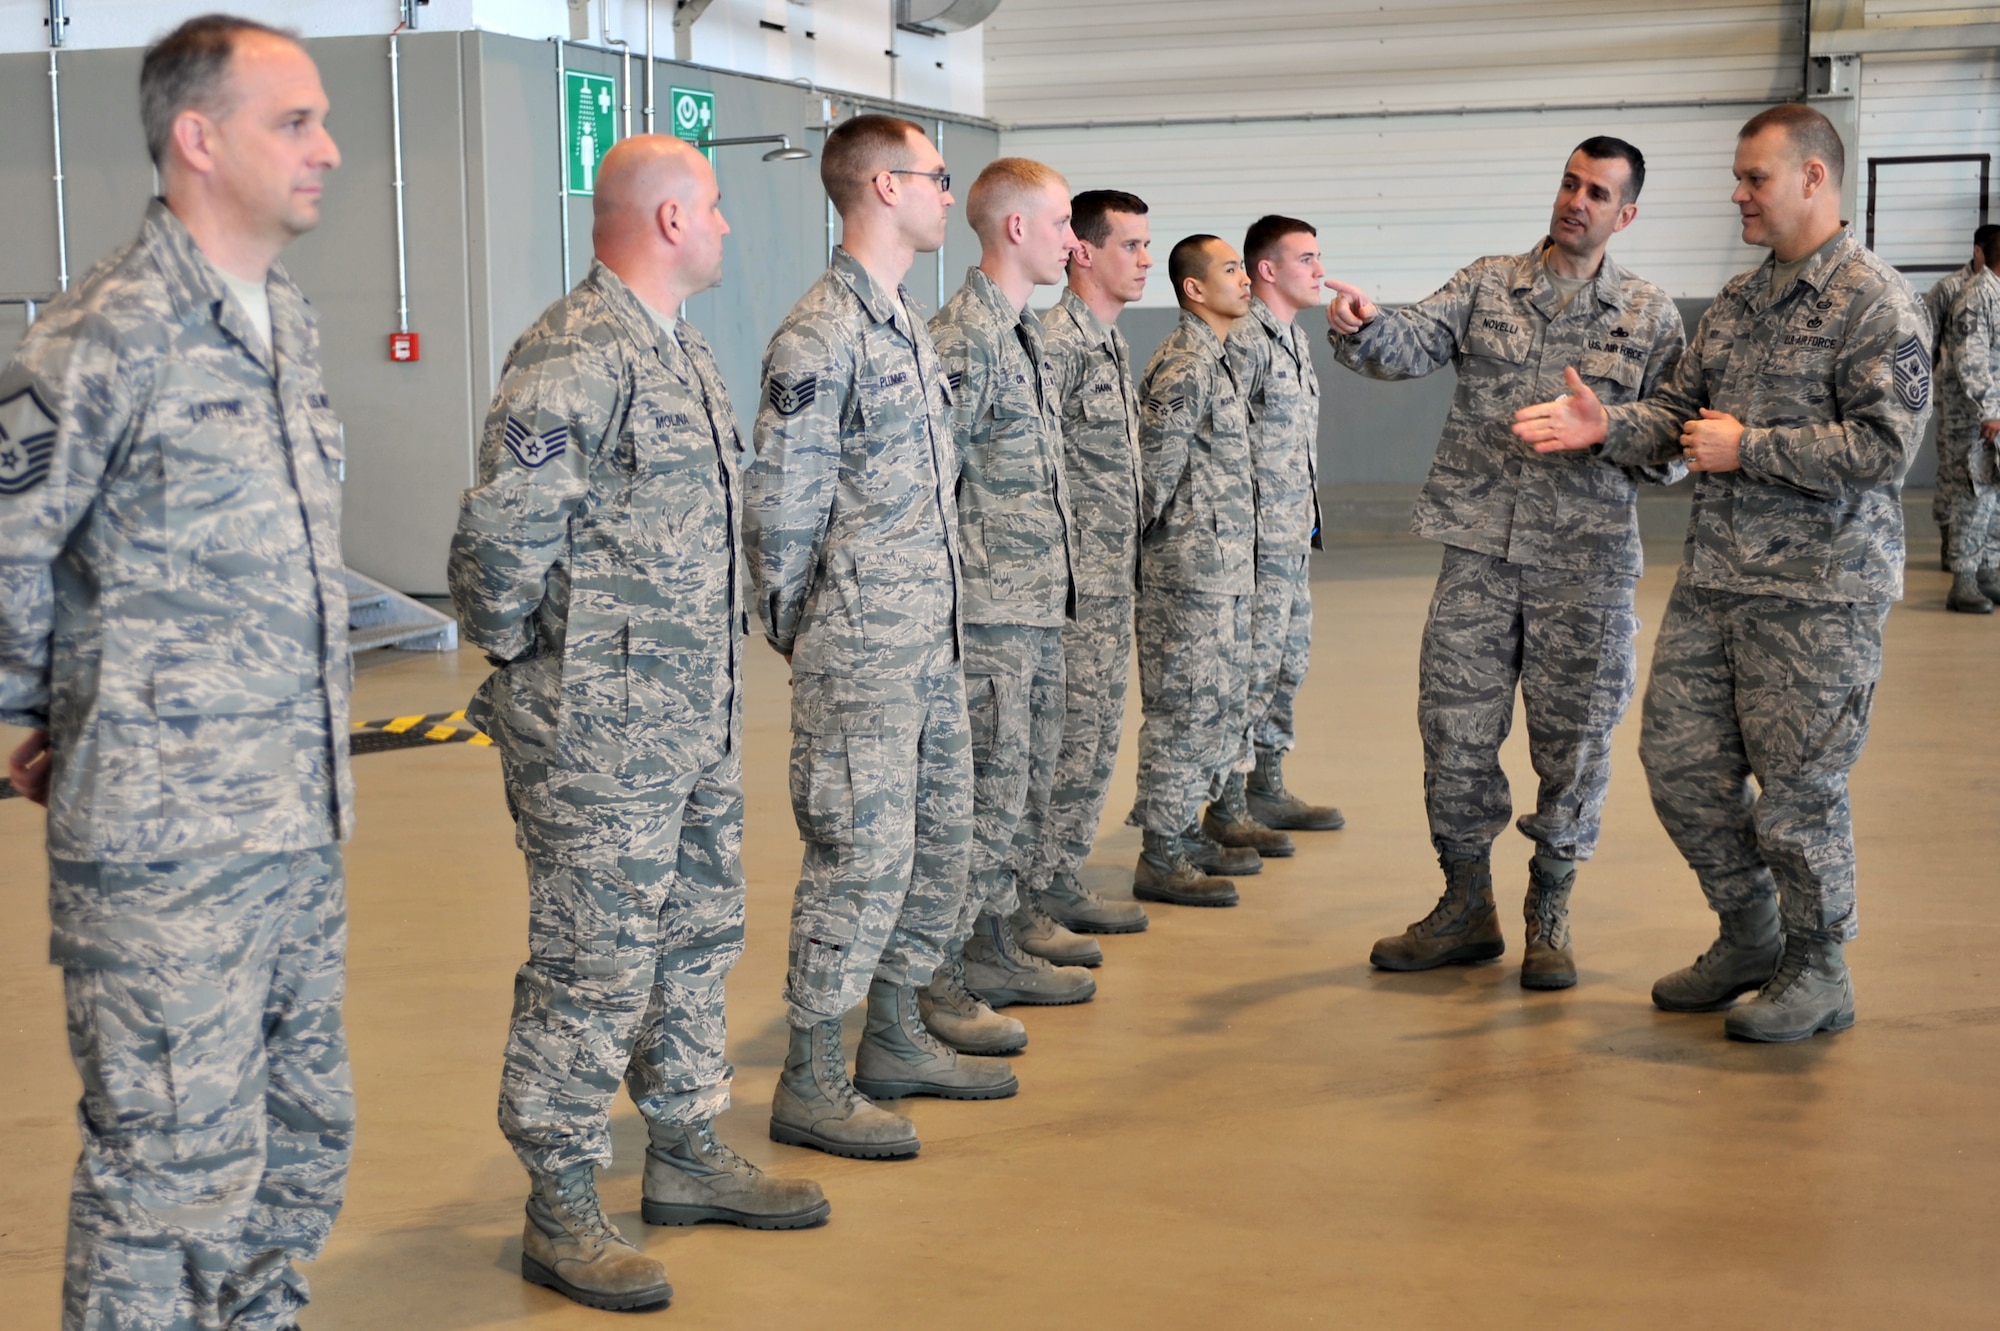 Chief Master Sgt. of the Air Force James Roy meets with Airmen during a 521 Air Mobility Operations Wing tour at Ramstein Air Base, Germany, March 14, 2012. Chief Master Sgt. of the Air Force Roy visited several units at Ramstein and Landstuhl. (U.S. Air Force photo/Airman 1st Class Caitlin O'Neil-McKeown)